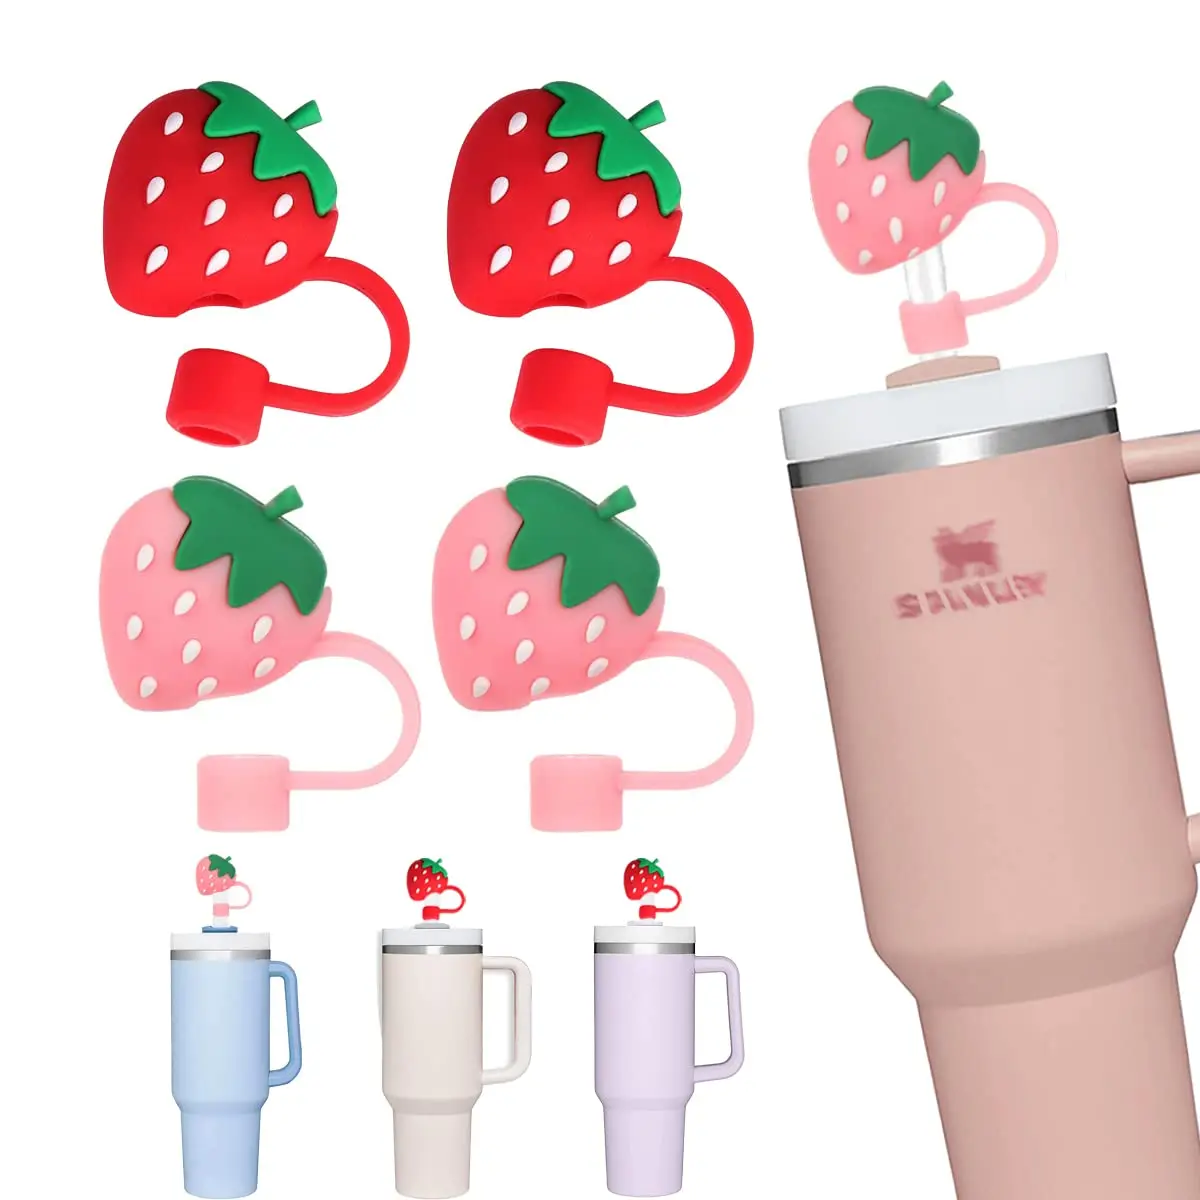 https://ae01.alicdn.com/kf/S6a02b1e4d51d4c0b89884b6a22ffc5c1Q/Straw-Covers-Cap-for-Stanley-Cup-4pcs-10MM-Cloud-Rainbow-Straw-Cover-Silicone-Straw-Covers-Cap.jpg